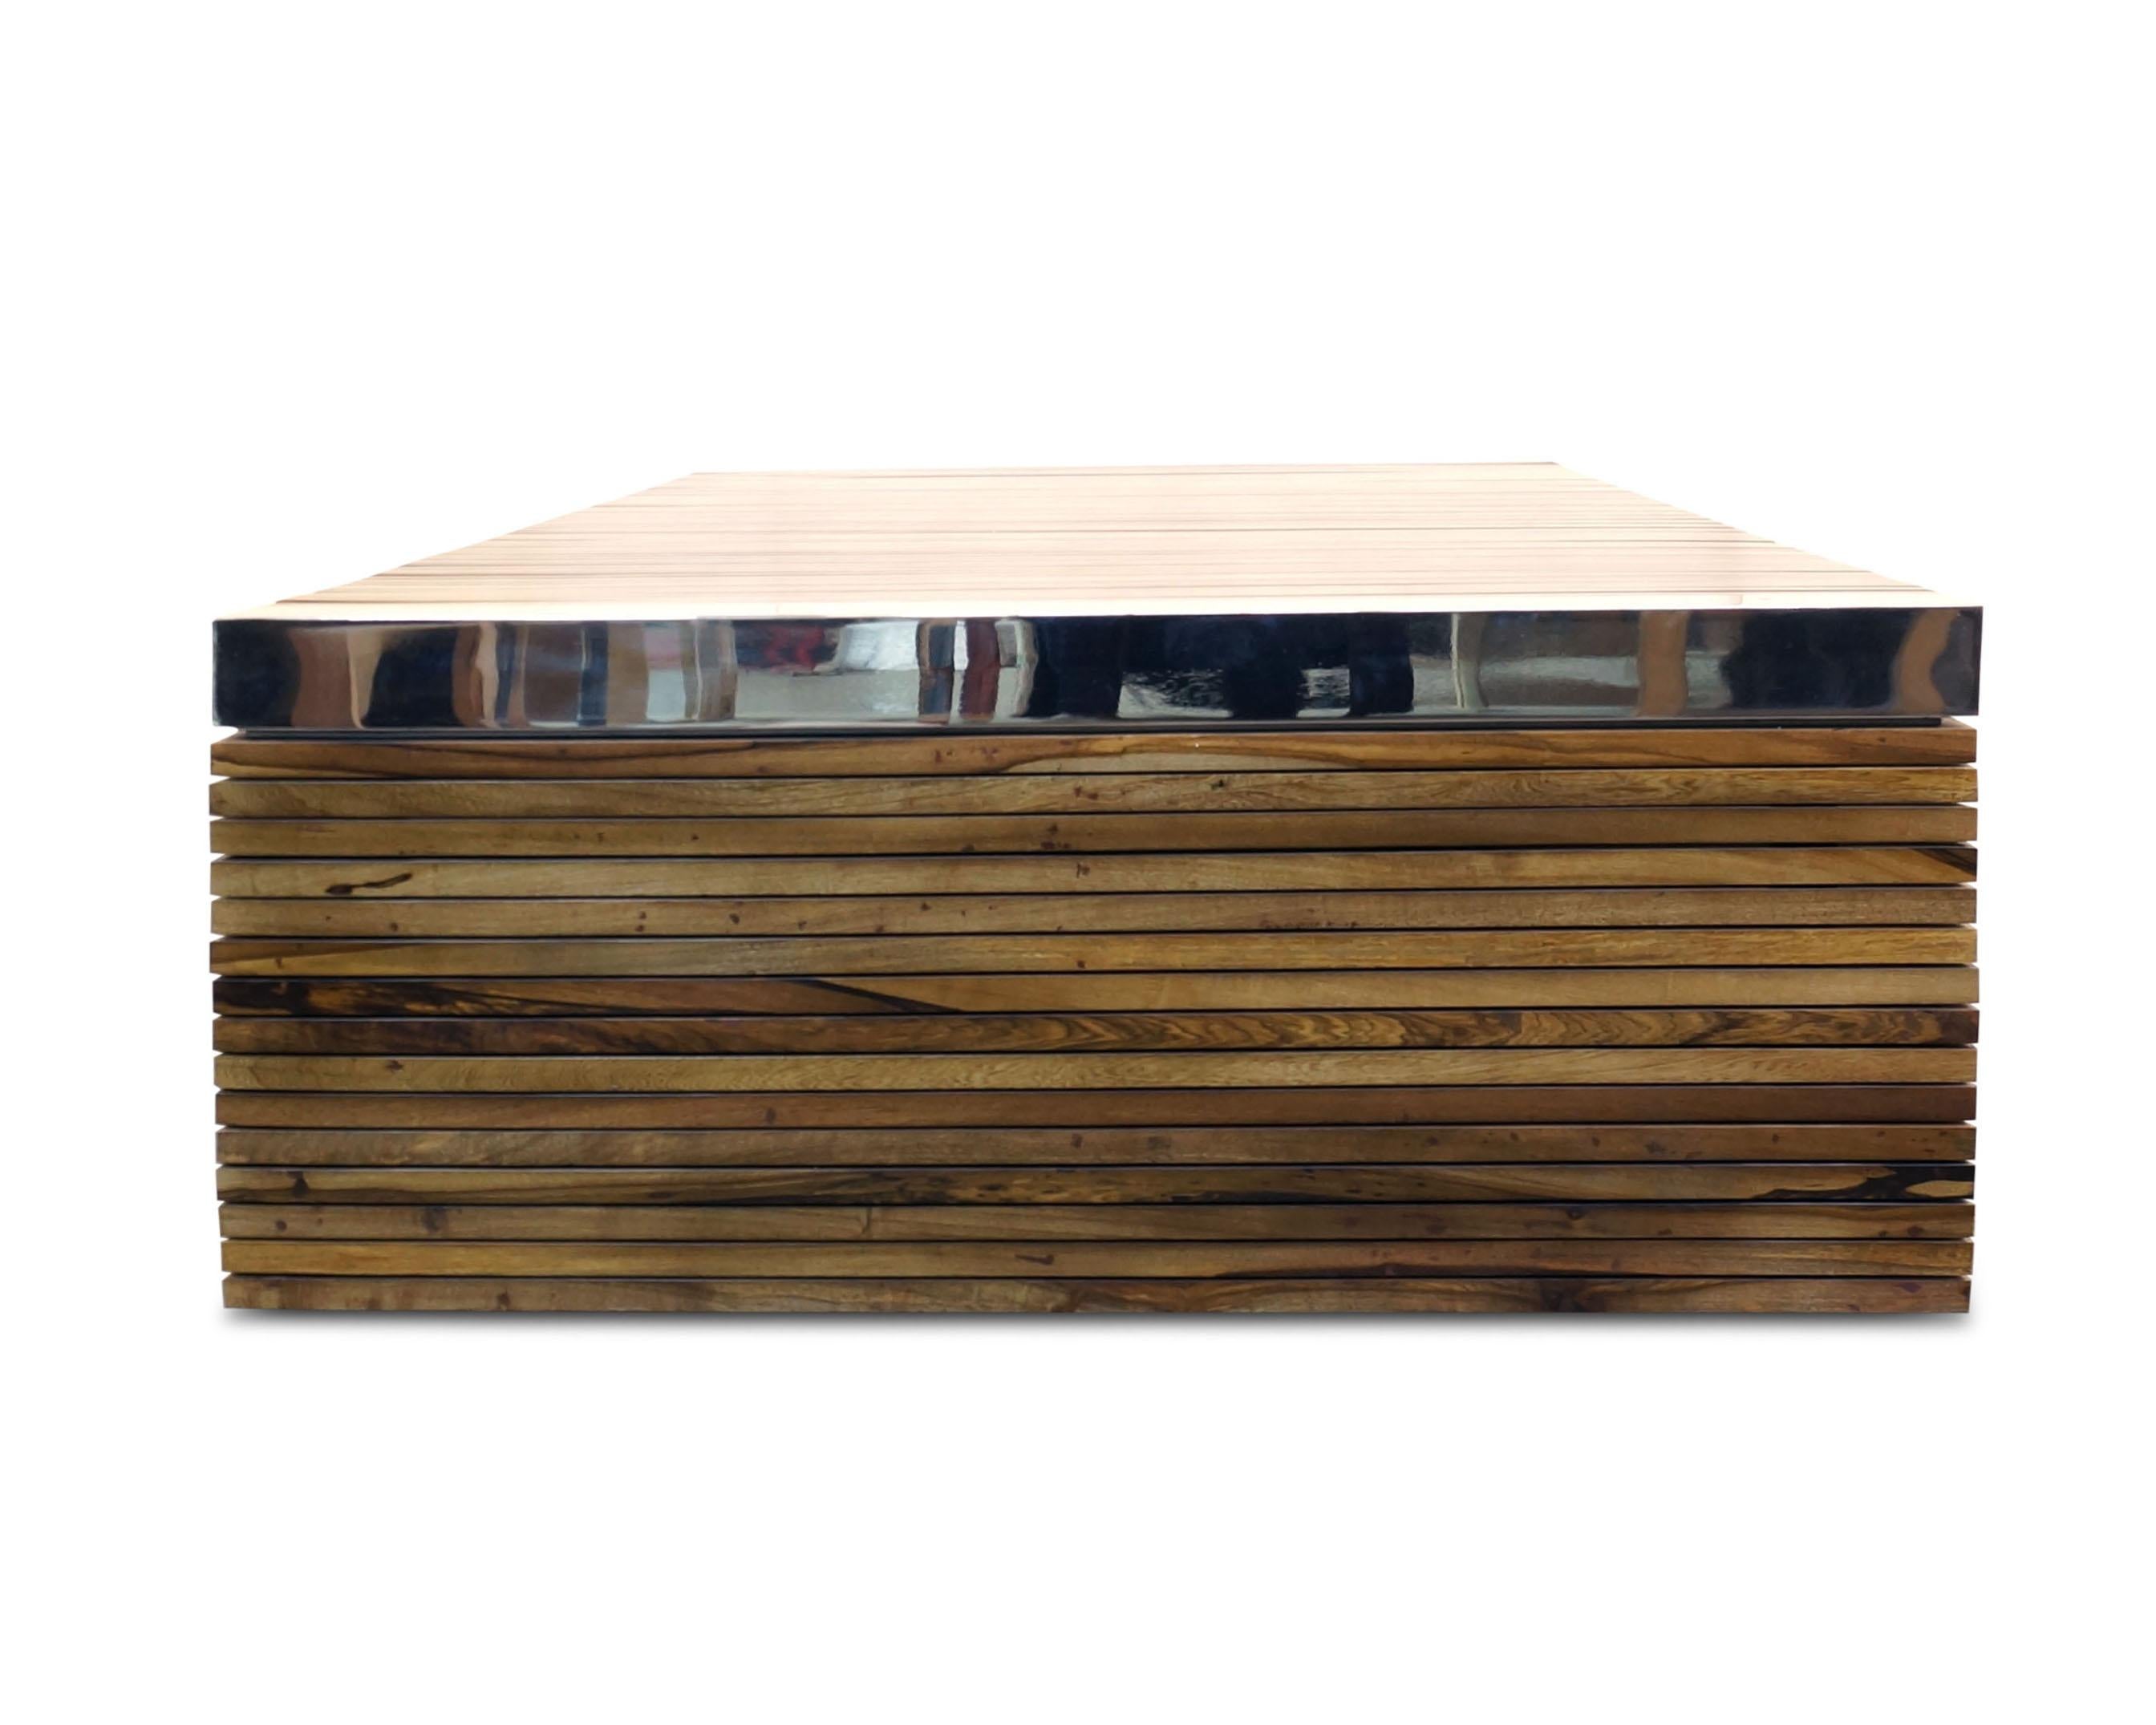 Argilla Coffee Table with Exotic Wood Slats and Nickel-Plated Details, In Stock

Cette table particulière mesure 36